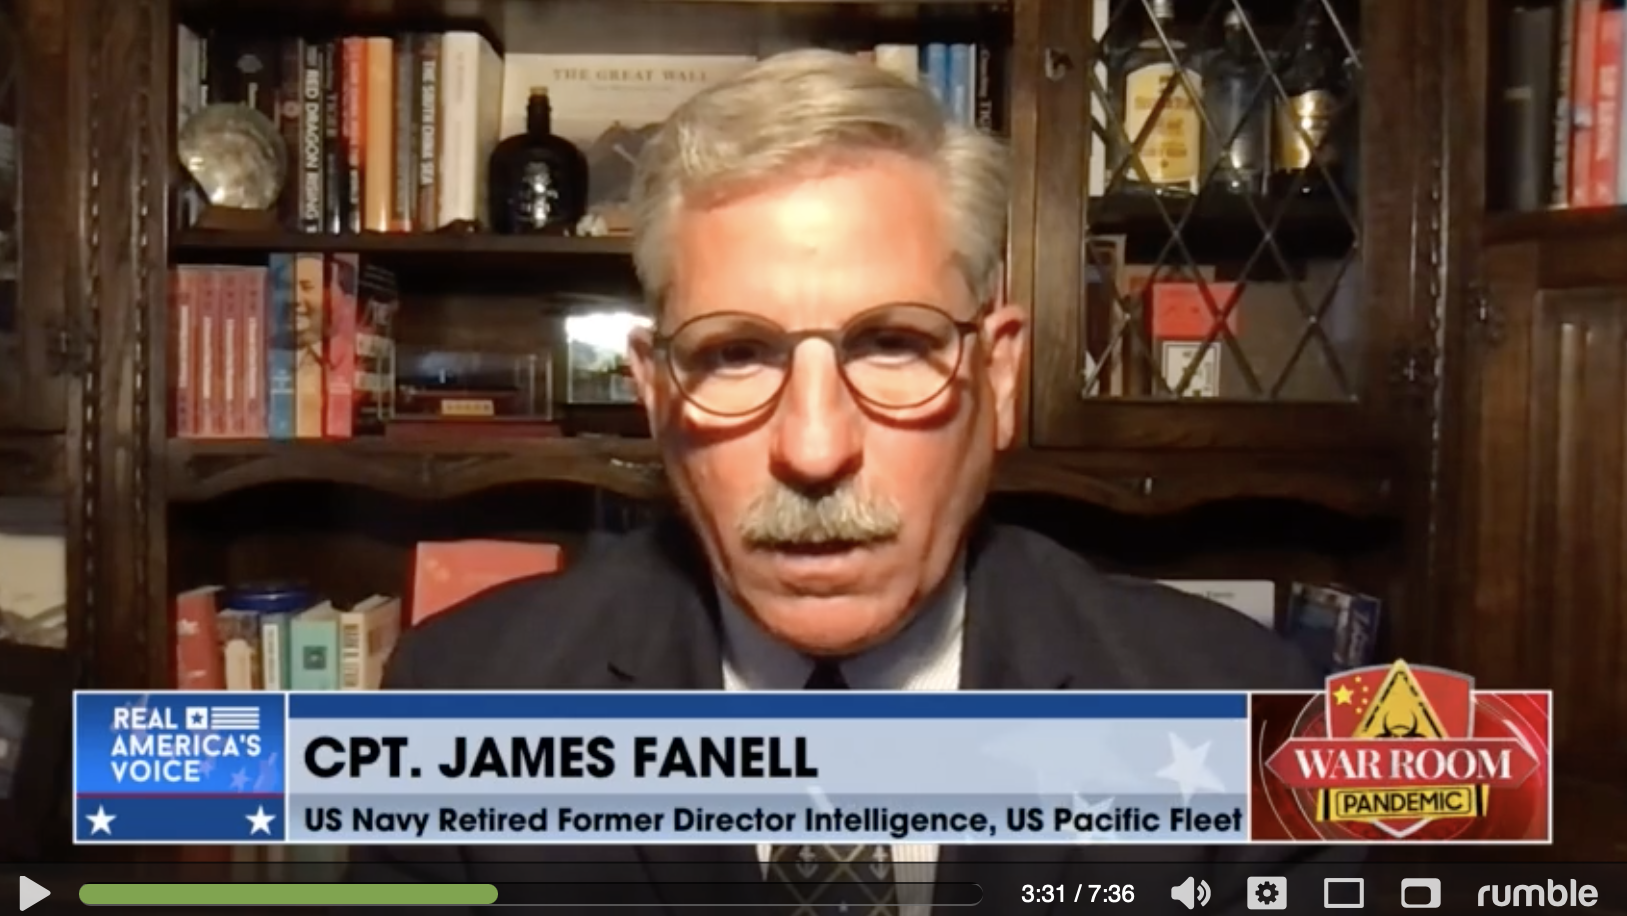 Cpt. James Fanell: A Declaration of People’s War